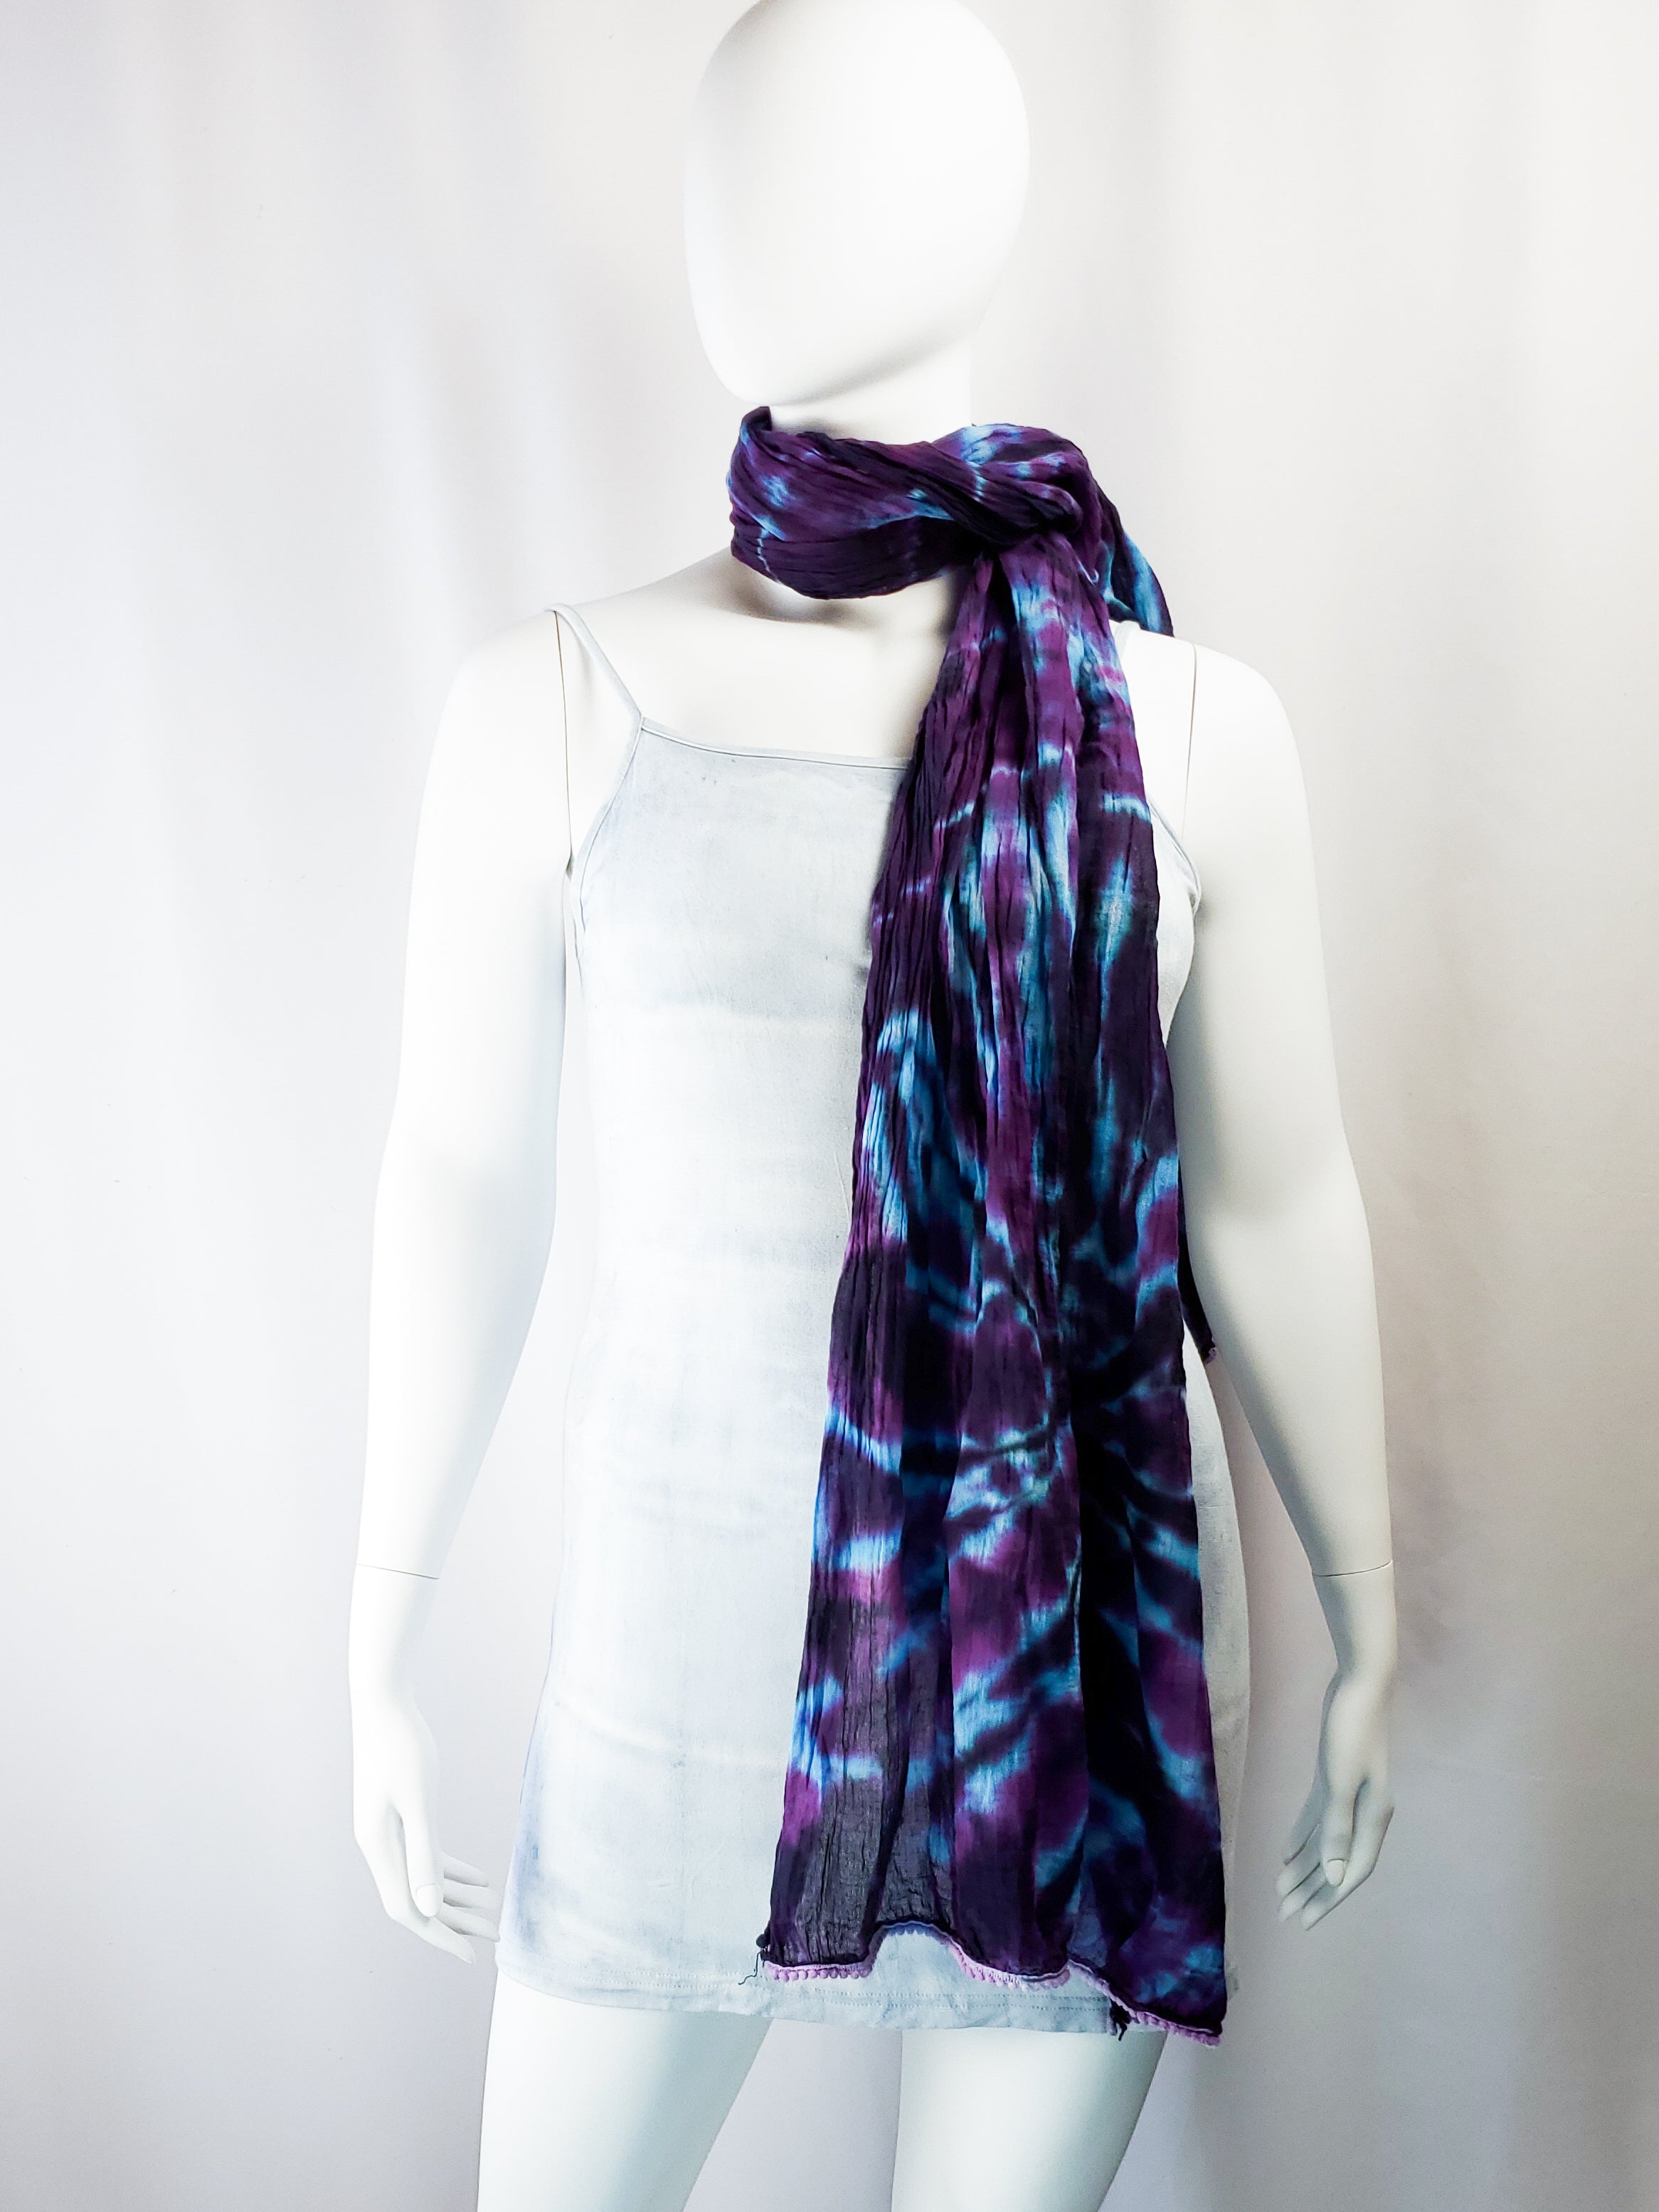 Purple and Peacock Spider Dye Crinkle Bandhani Shawl/Scarf - The Caffeinated Raven